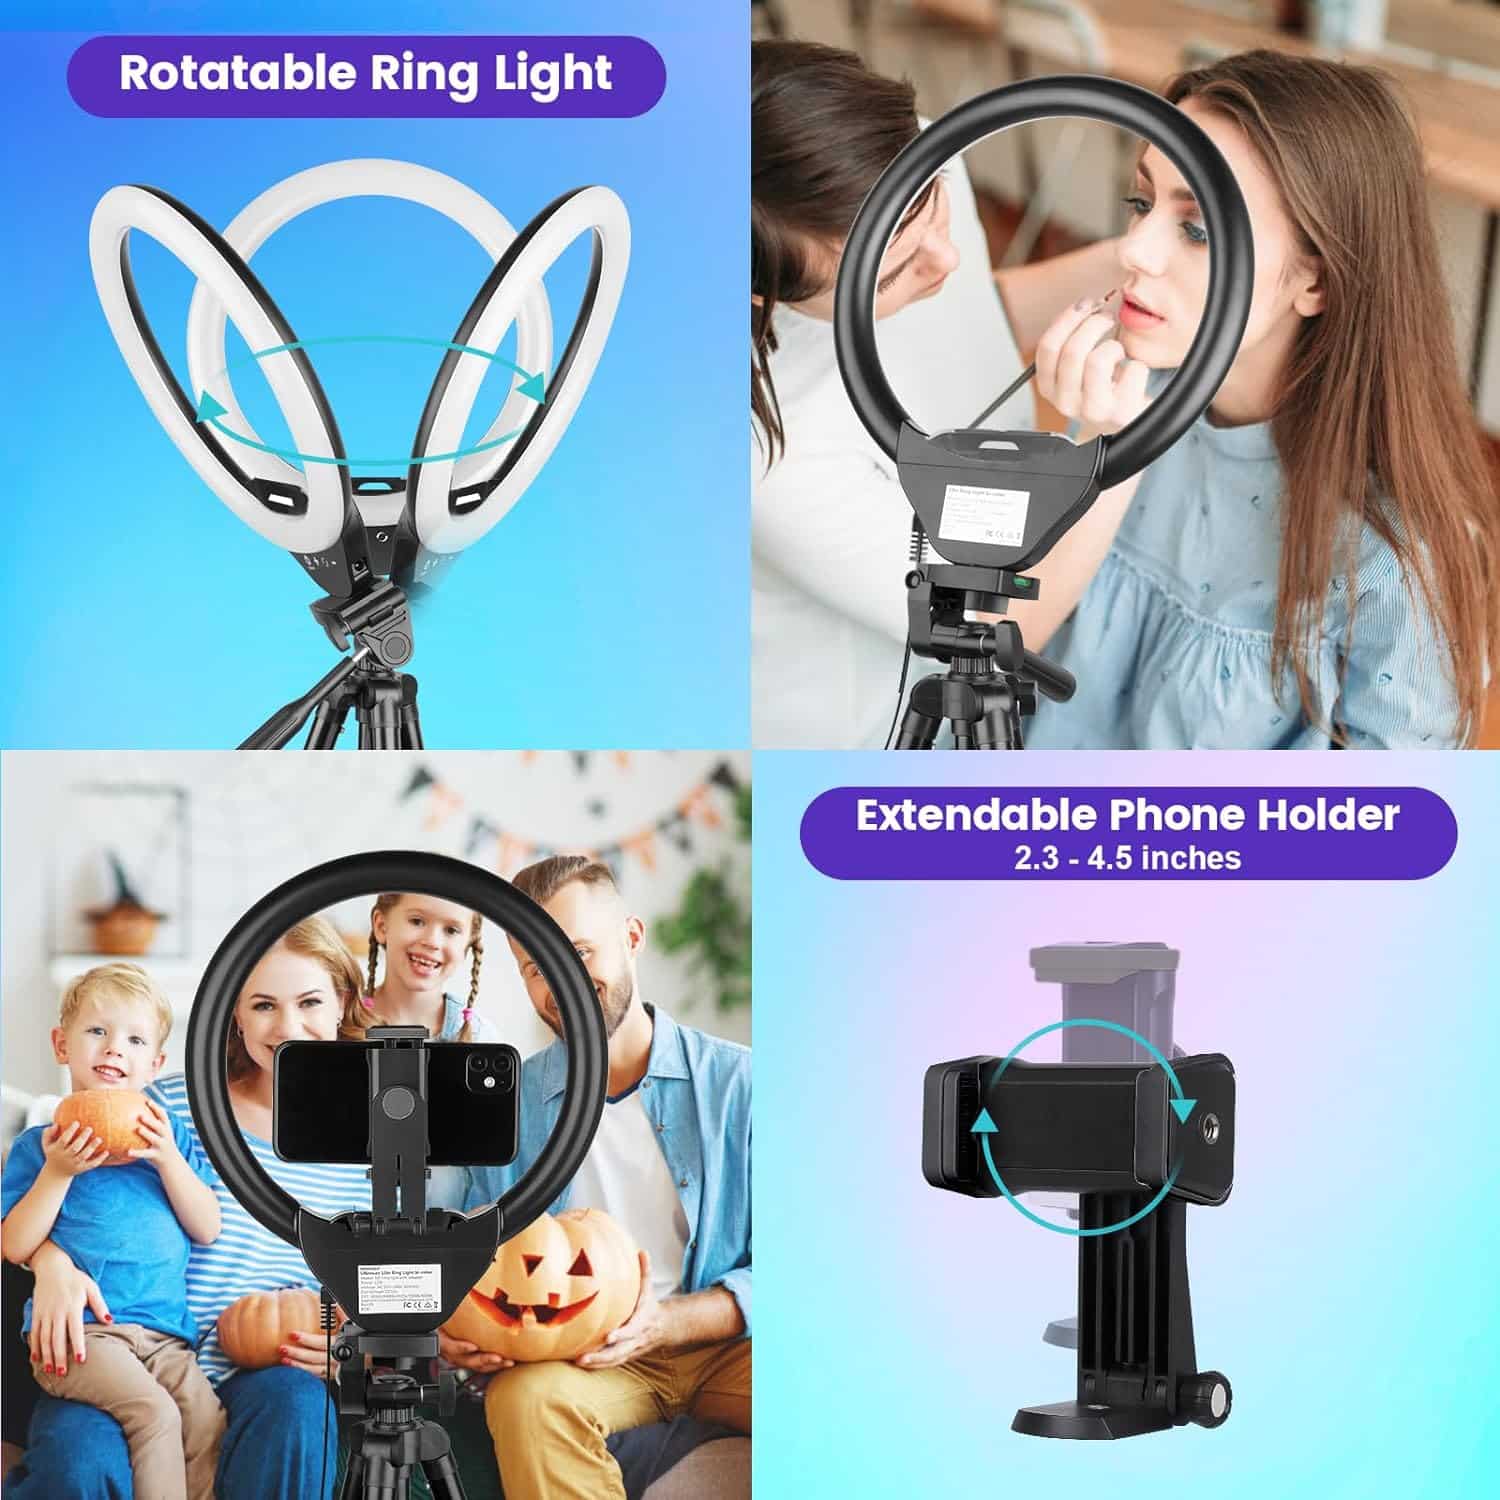 Sensyne 10 Ring Light with 50 Extendable Tripod Stand, LED Circle Lights with Phone Holder for Live Stream/Makeup/YouTube Video/TikTok, Compatible with All Phones